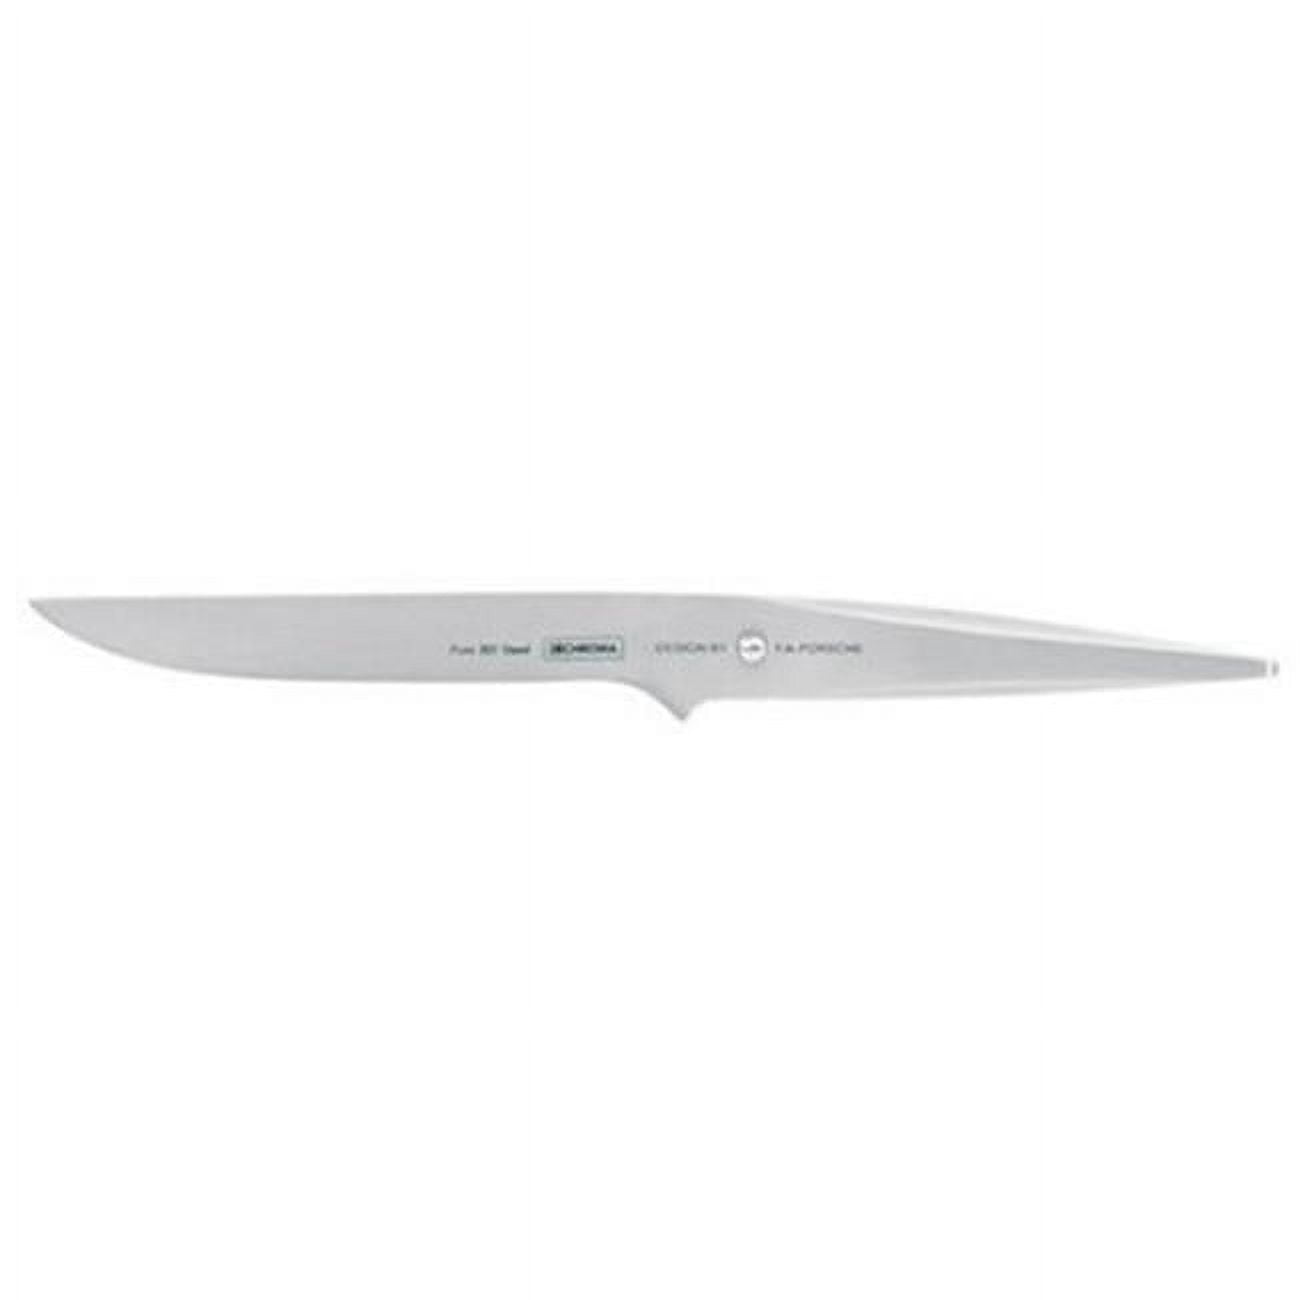 Chroma P08 Type 301 Designed By F.a. Porsche 5.75 In. Boning Knife